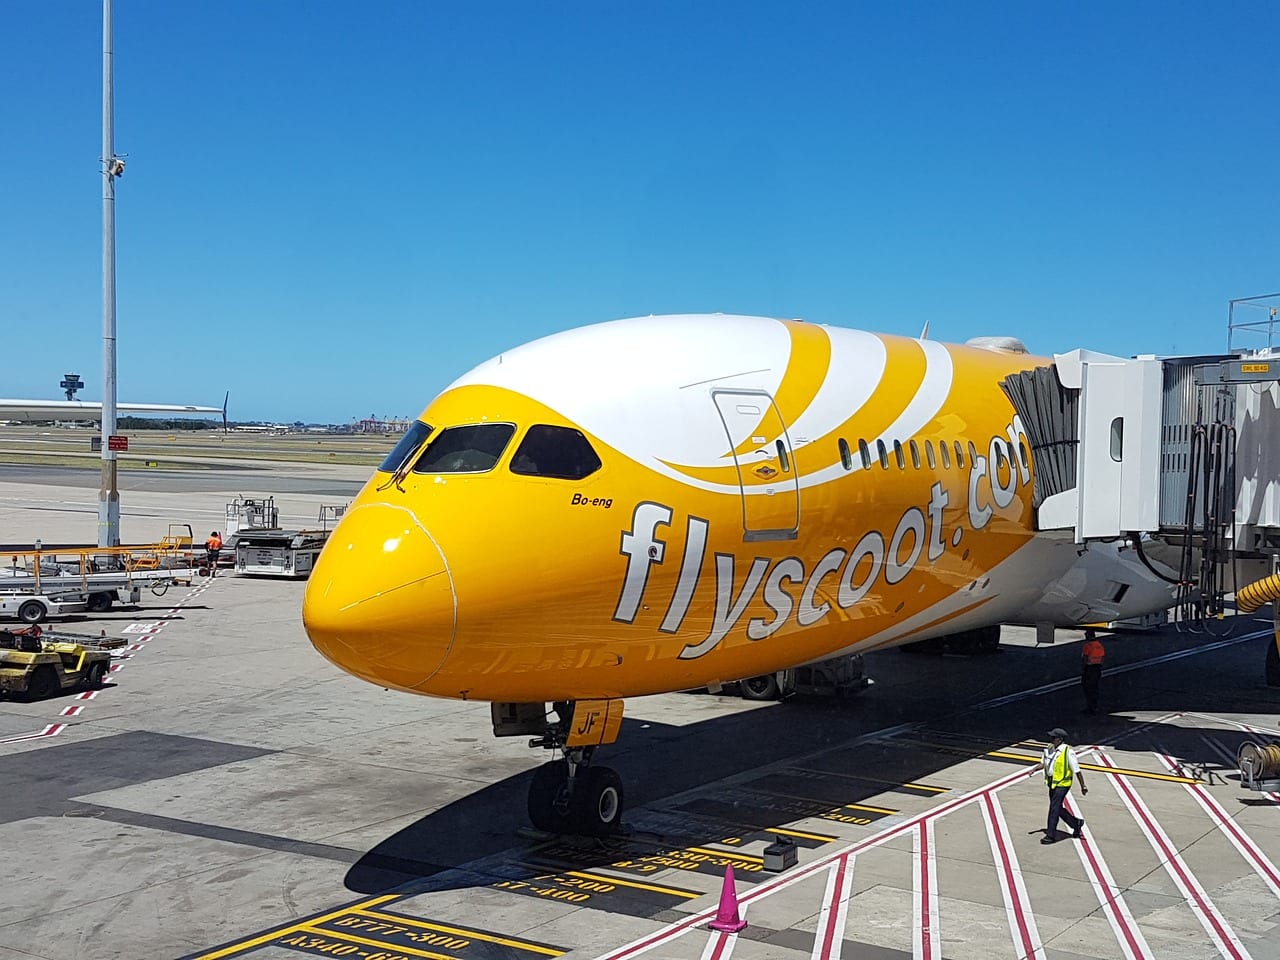 capacidad jueves La risa My Scoot Athens to Singapore flight experience - First time Using Flyscoot